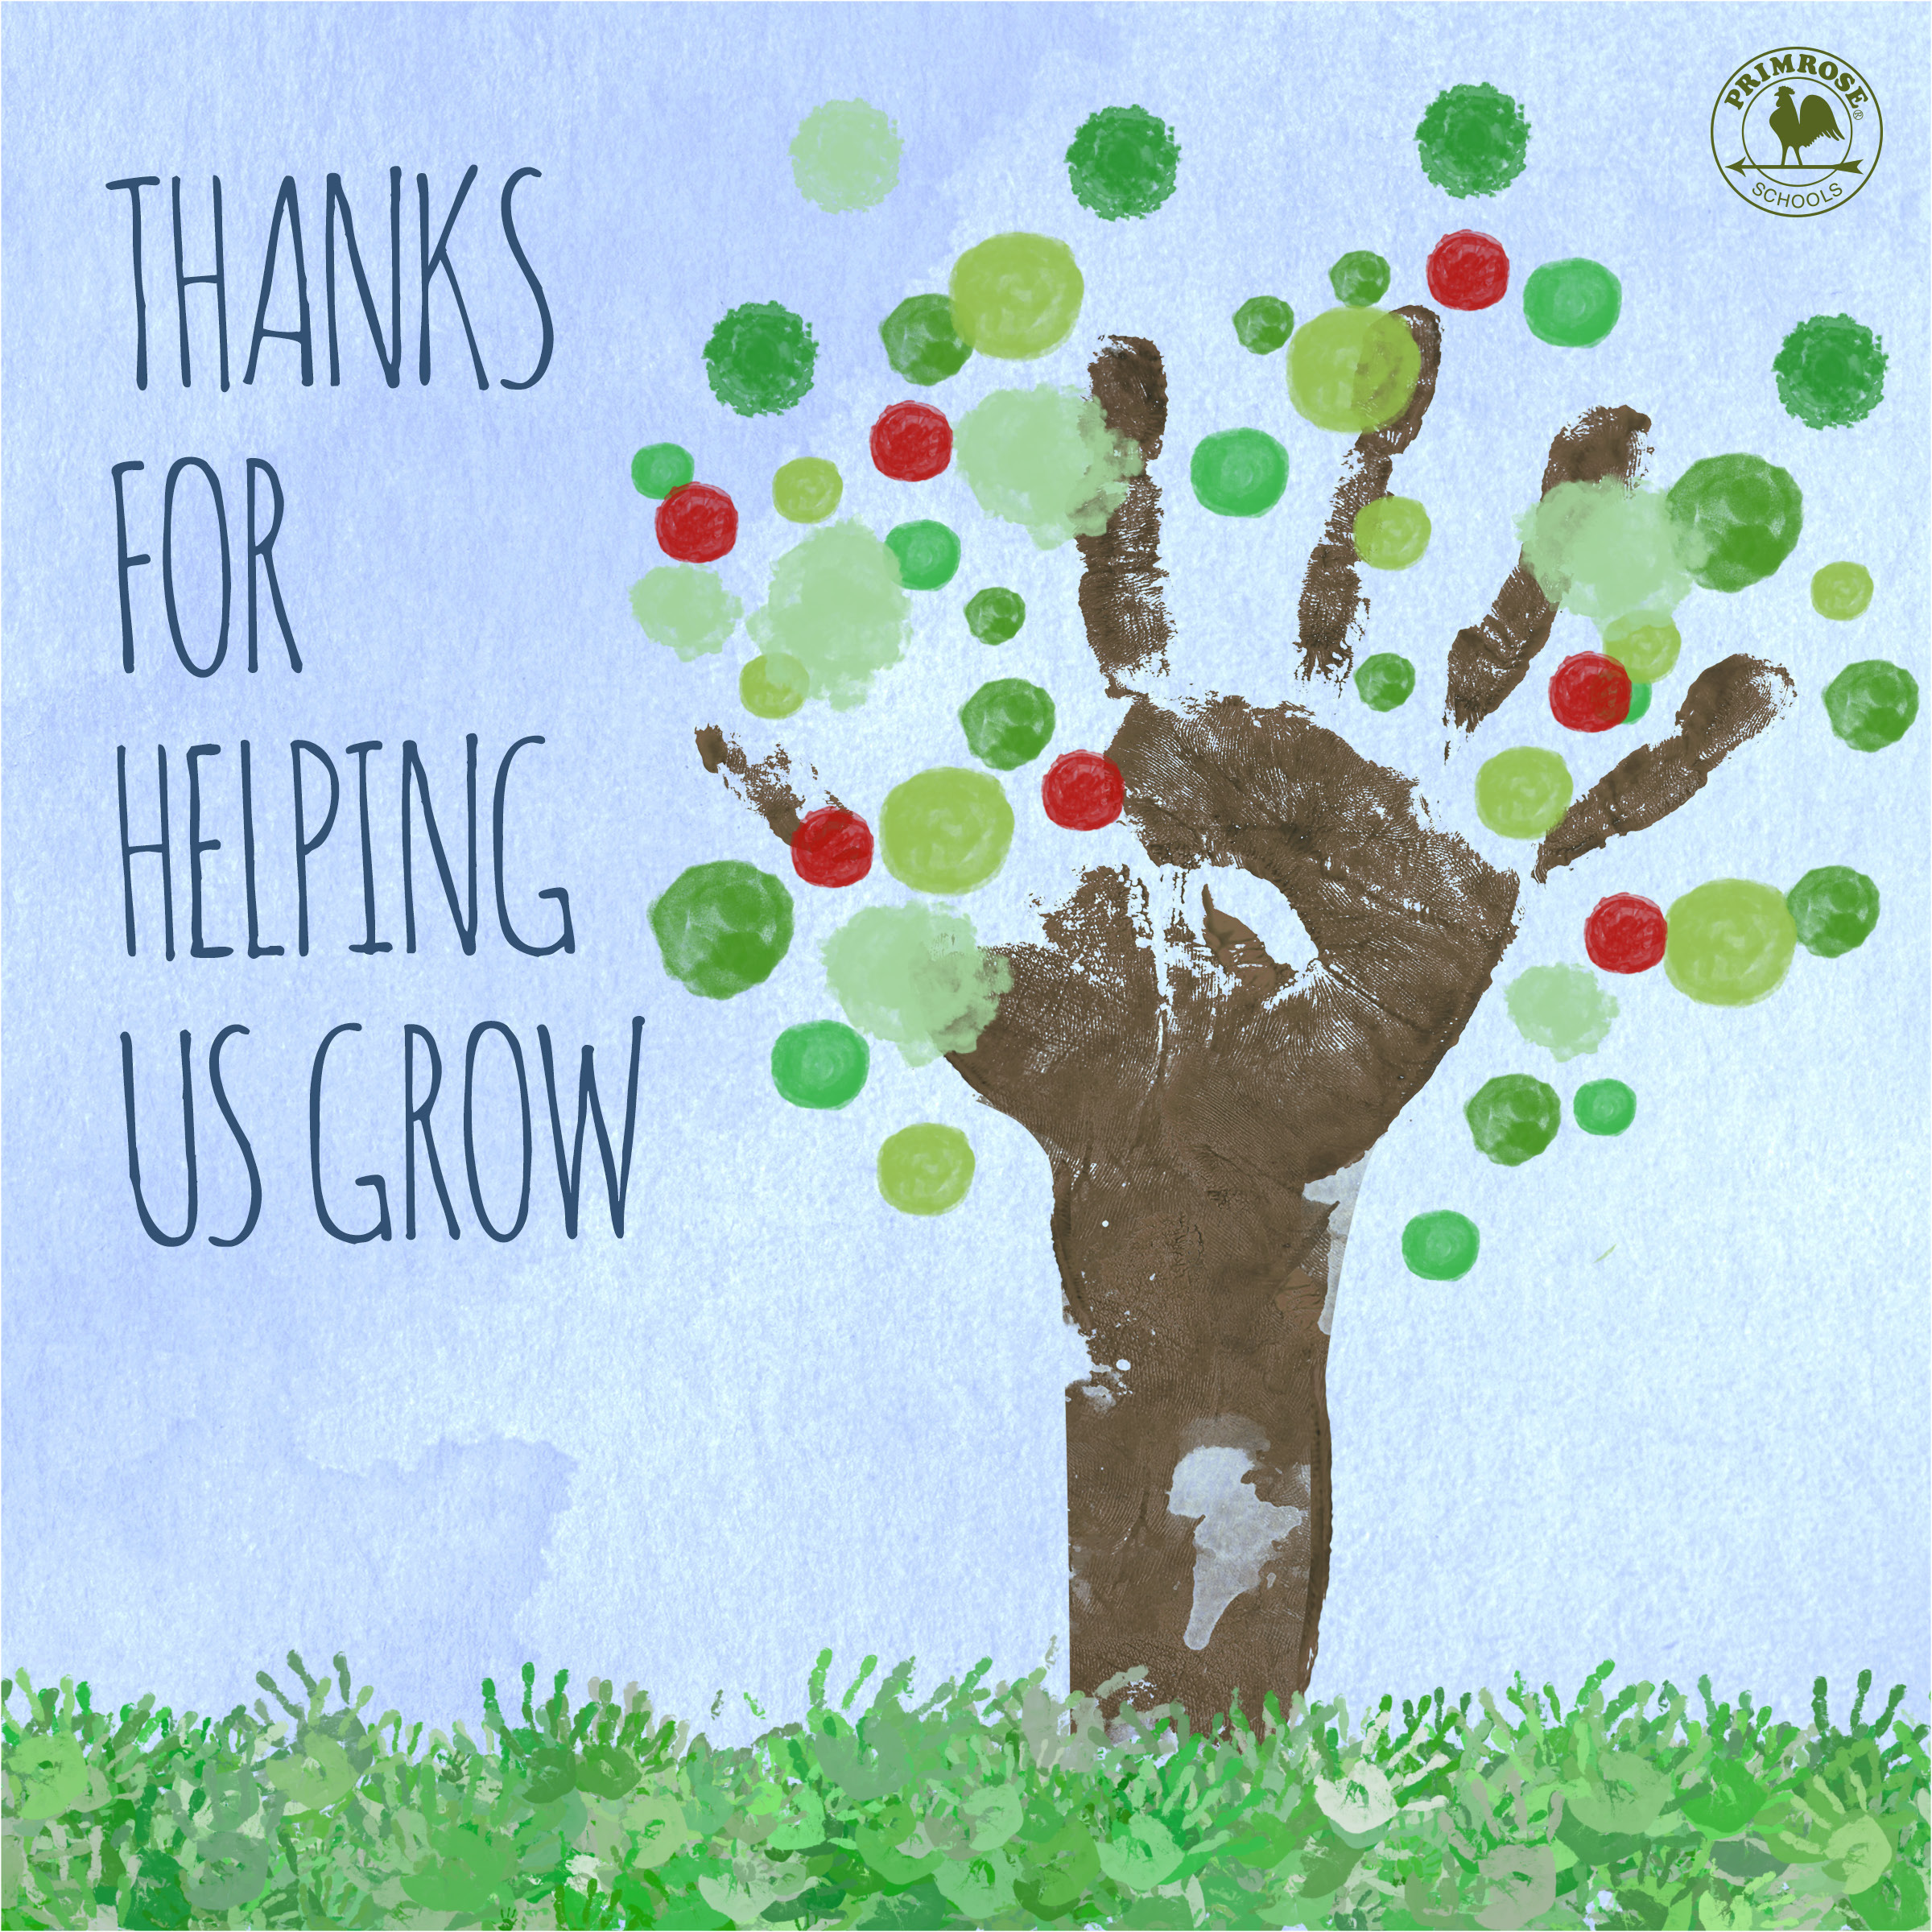 Thanks for helping us grow!